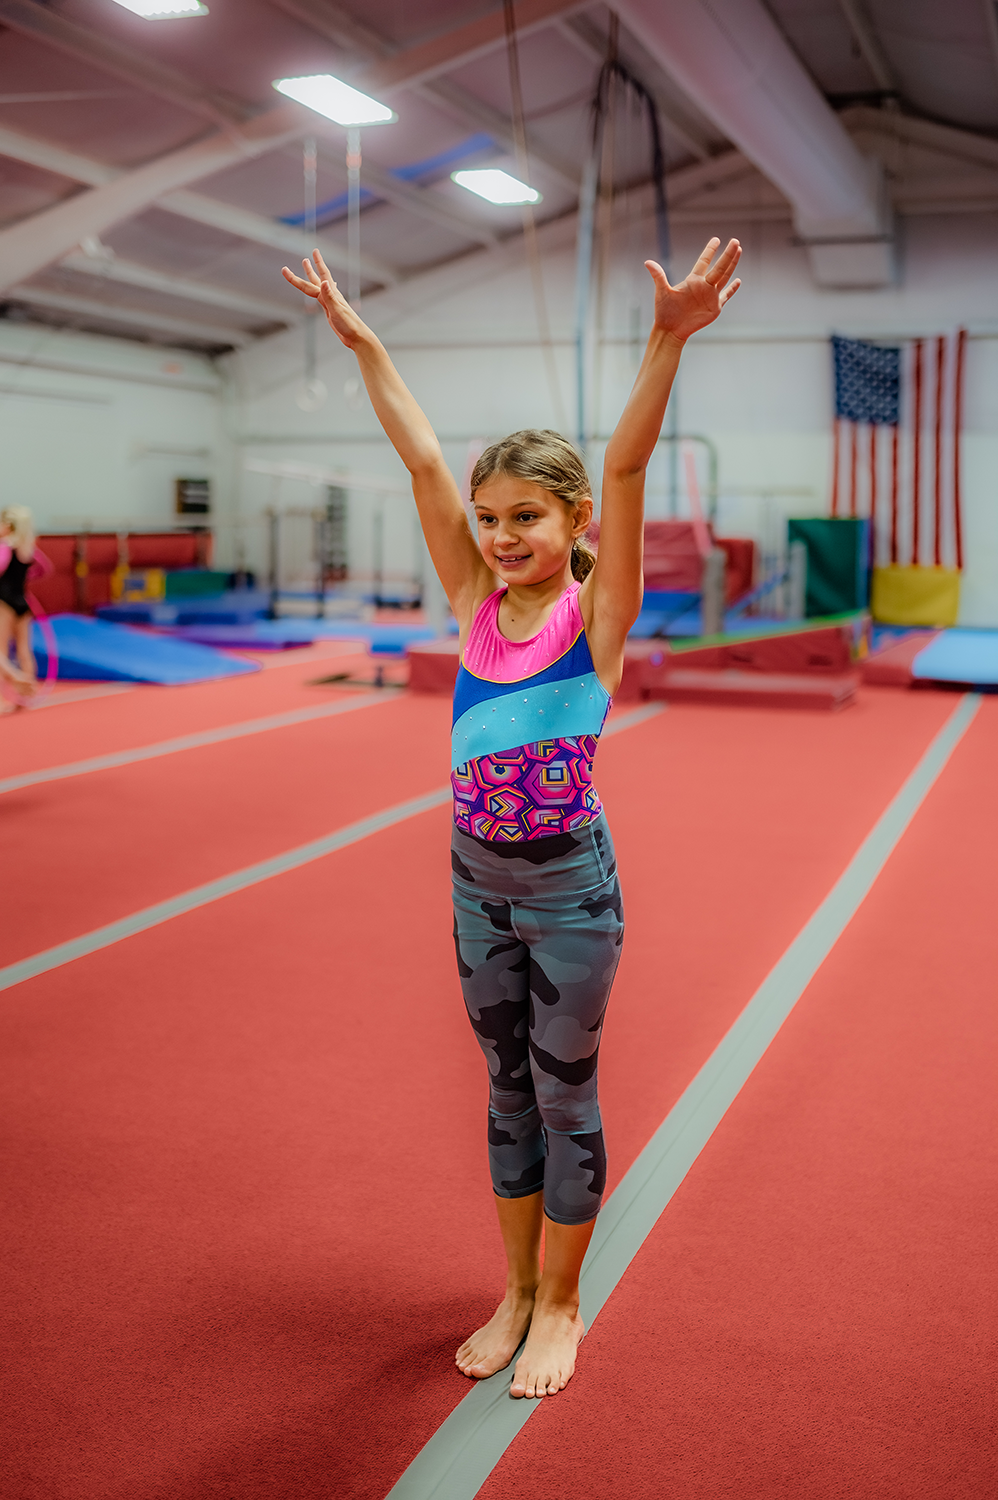 A young girl dressed in a gymnastics leotard stands with arms raised overhead practicing her final stance.